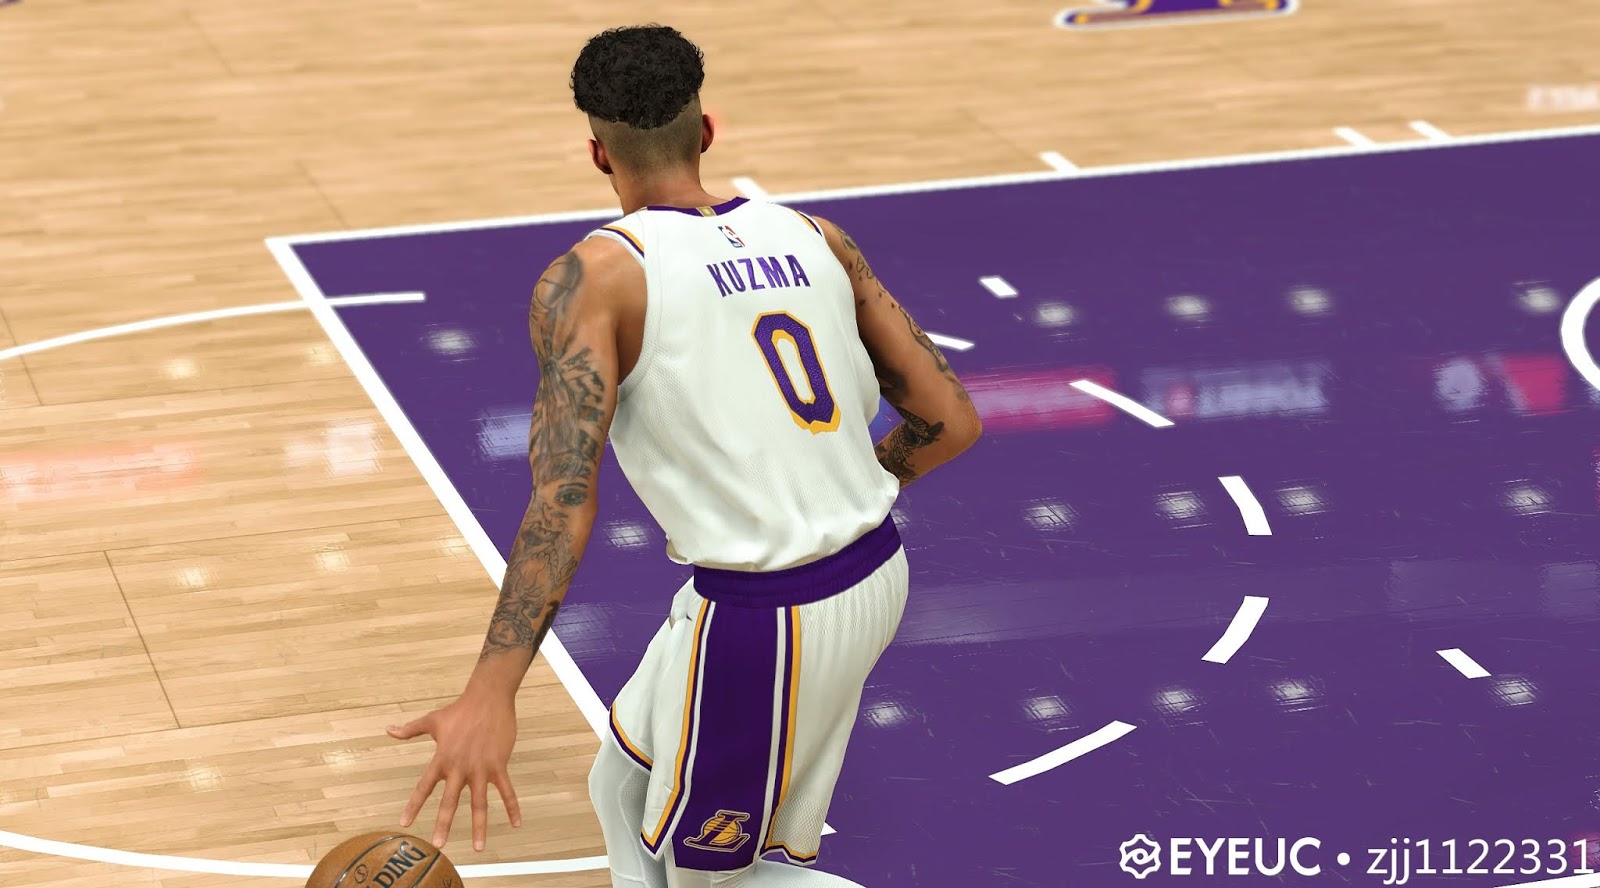 Kyle Kuzma Hair and Body Model by zjj1122 [FOR 2K20]